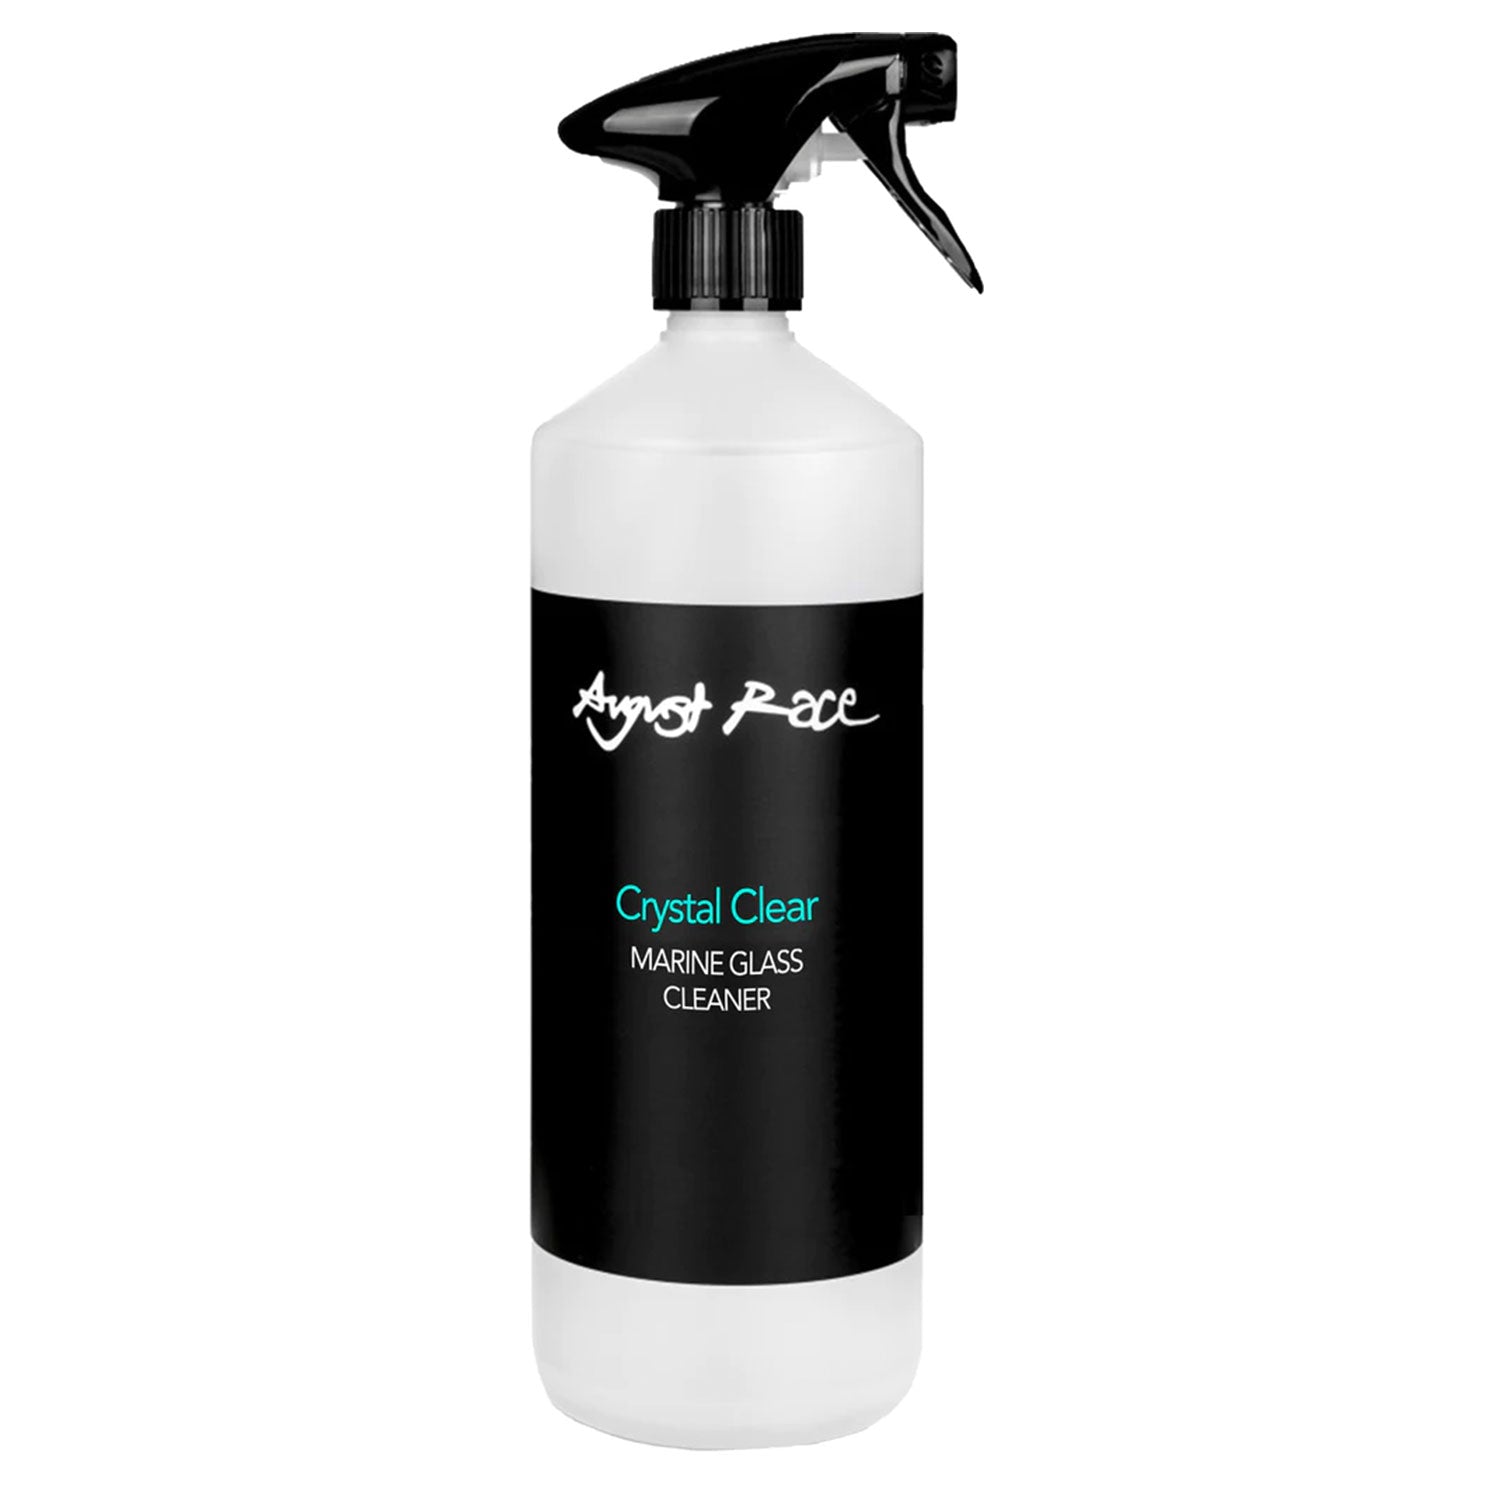 August Race - Crystal Clear - Marine Glass Cleaner